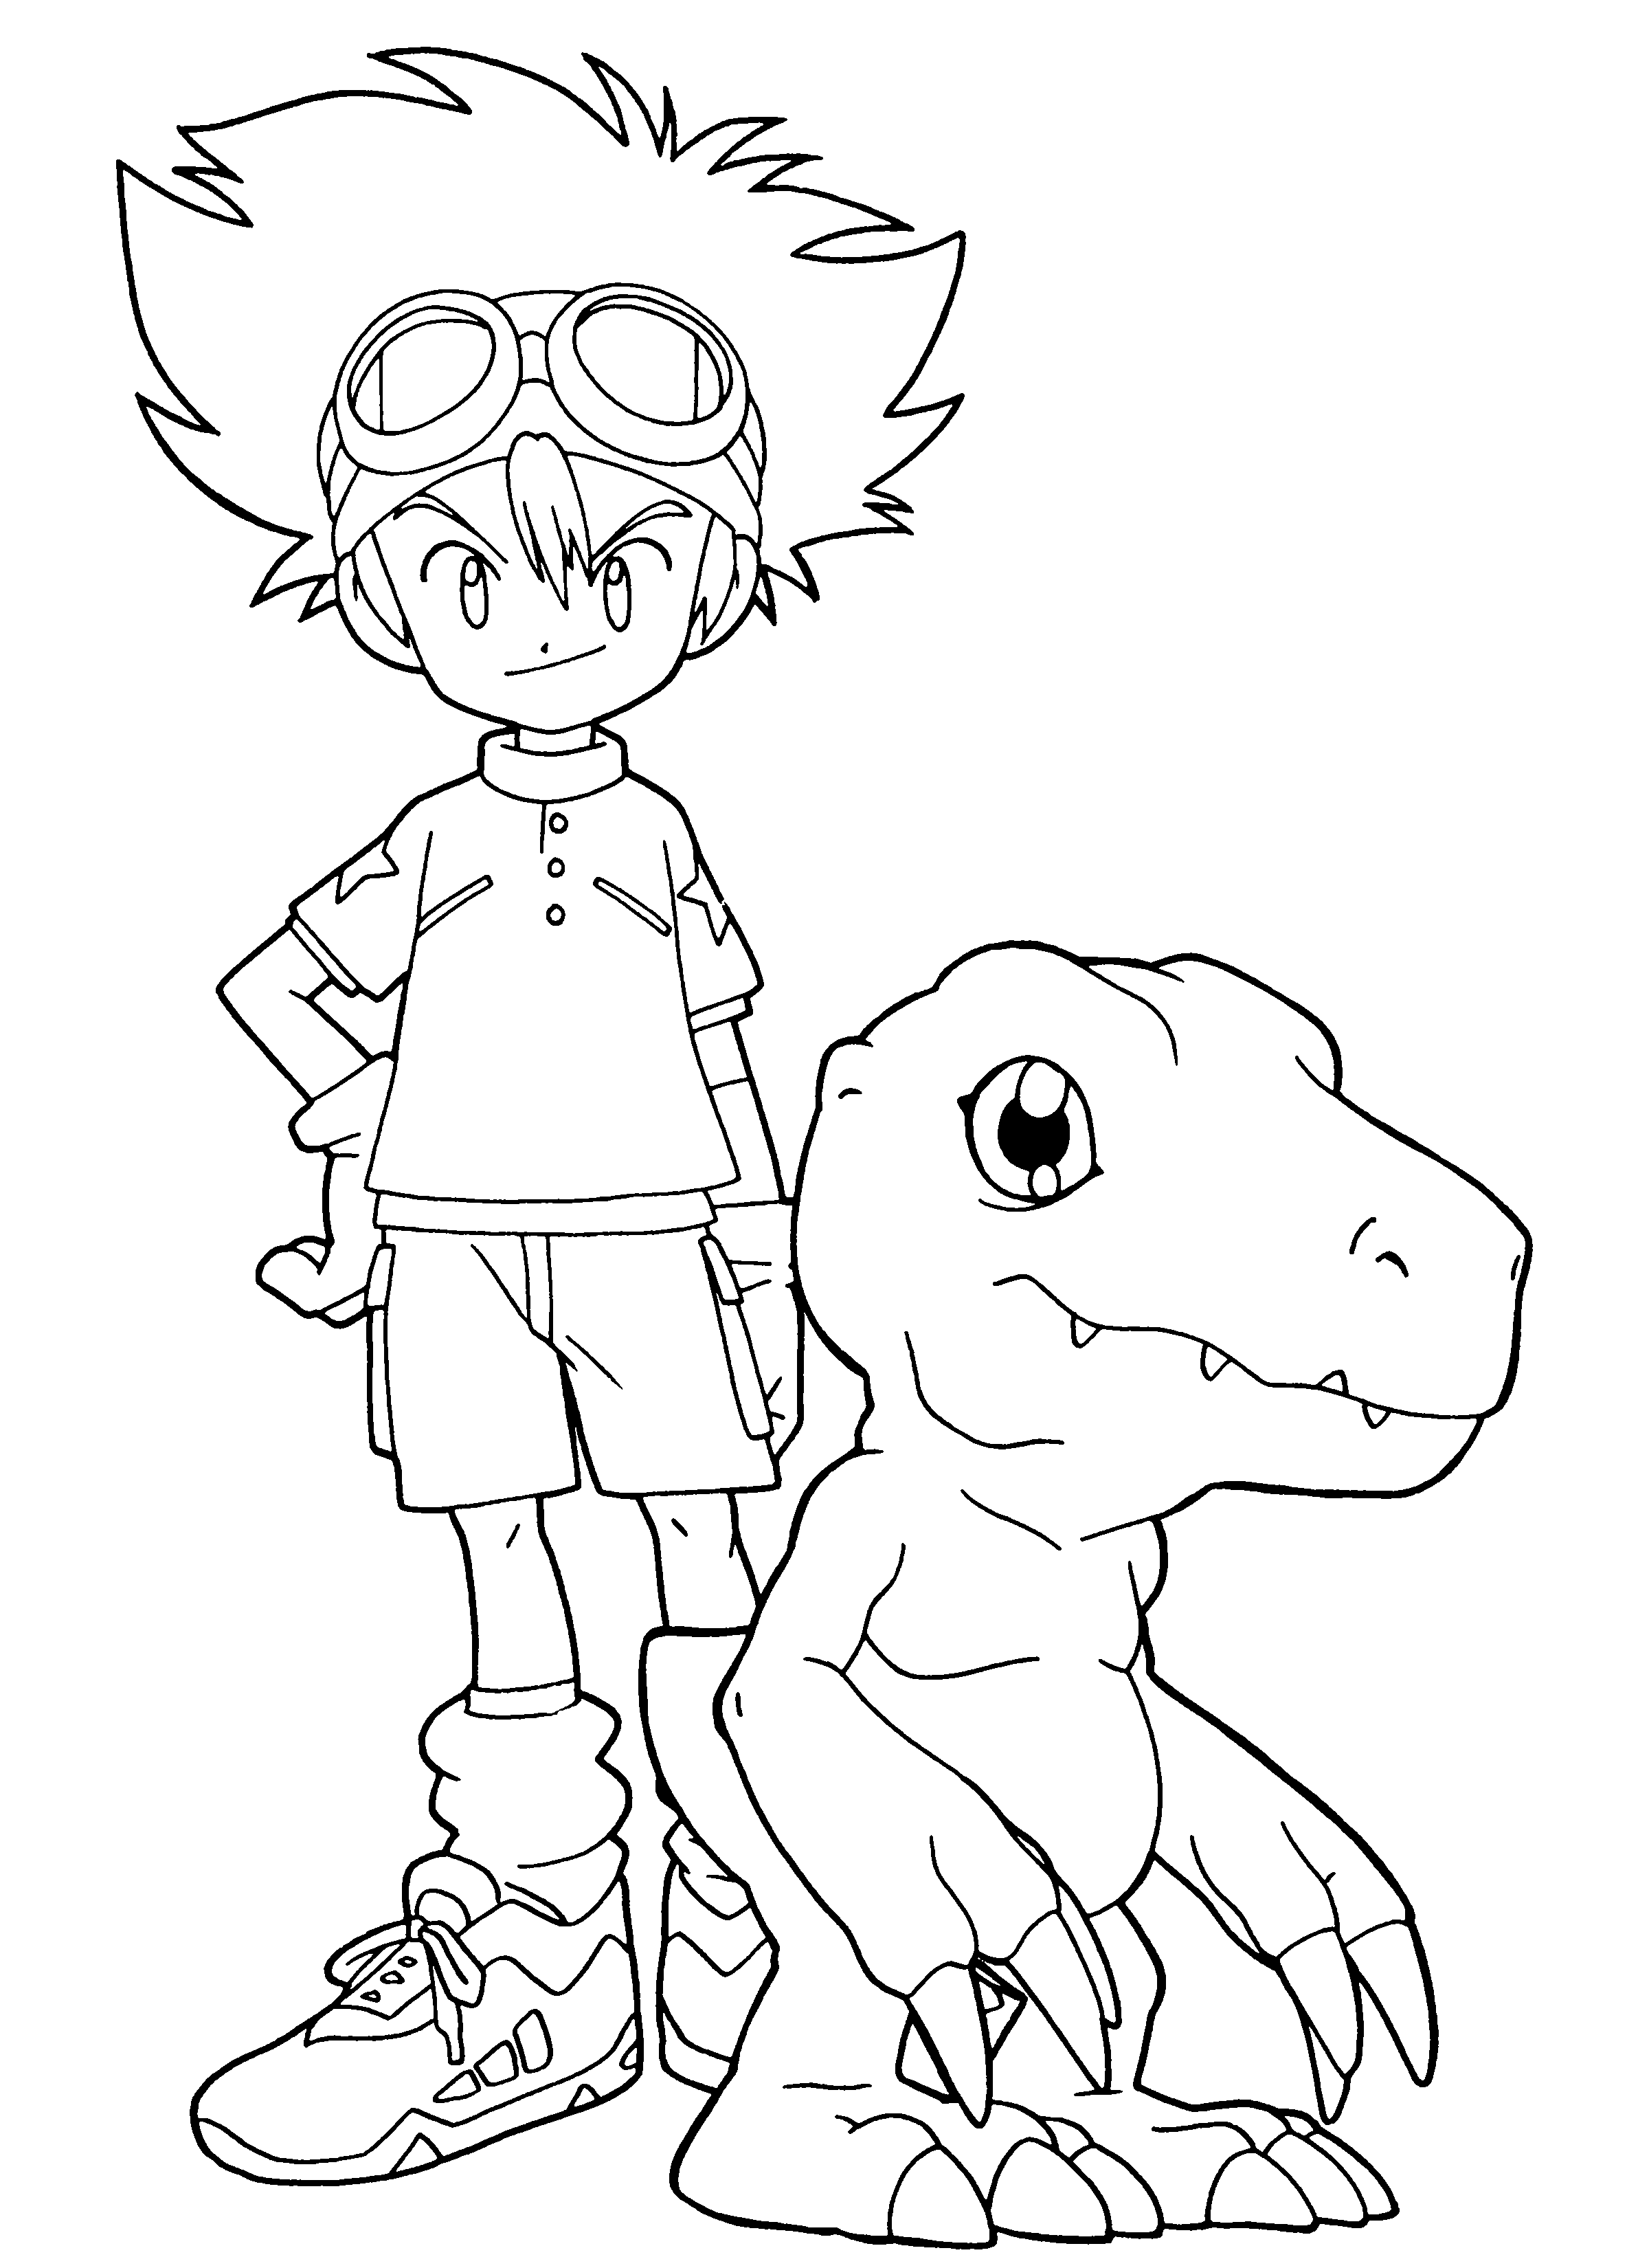 Digimon Agumon coloring page to print and color